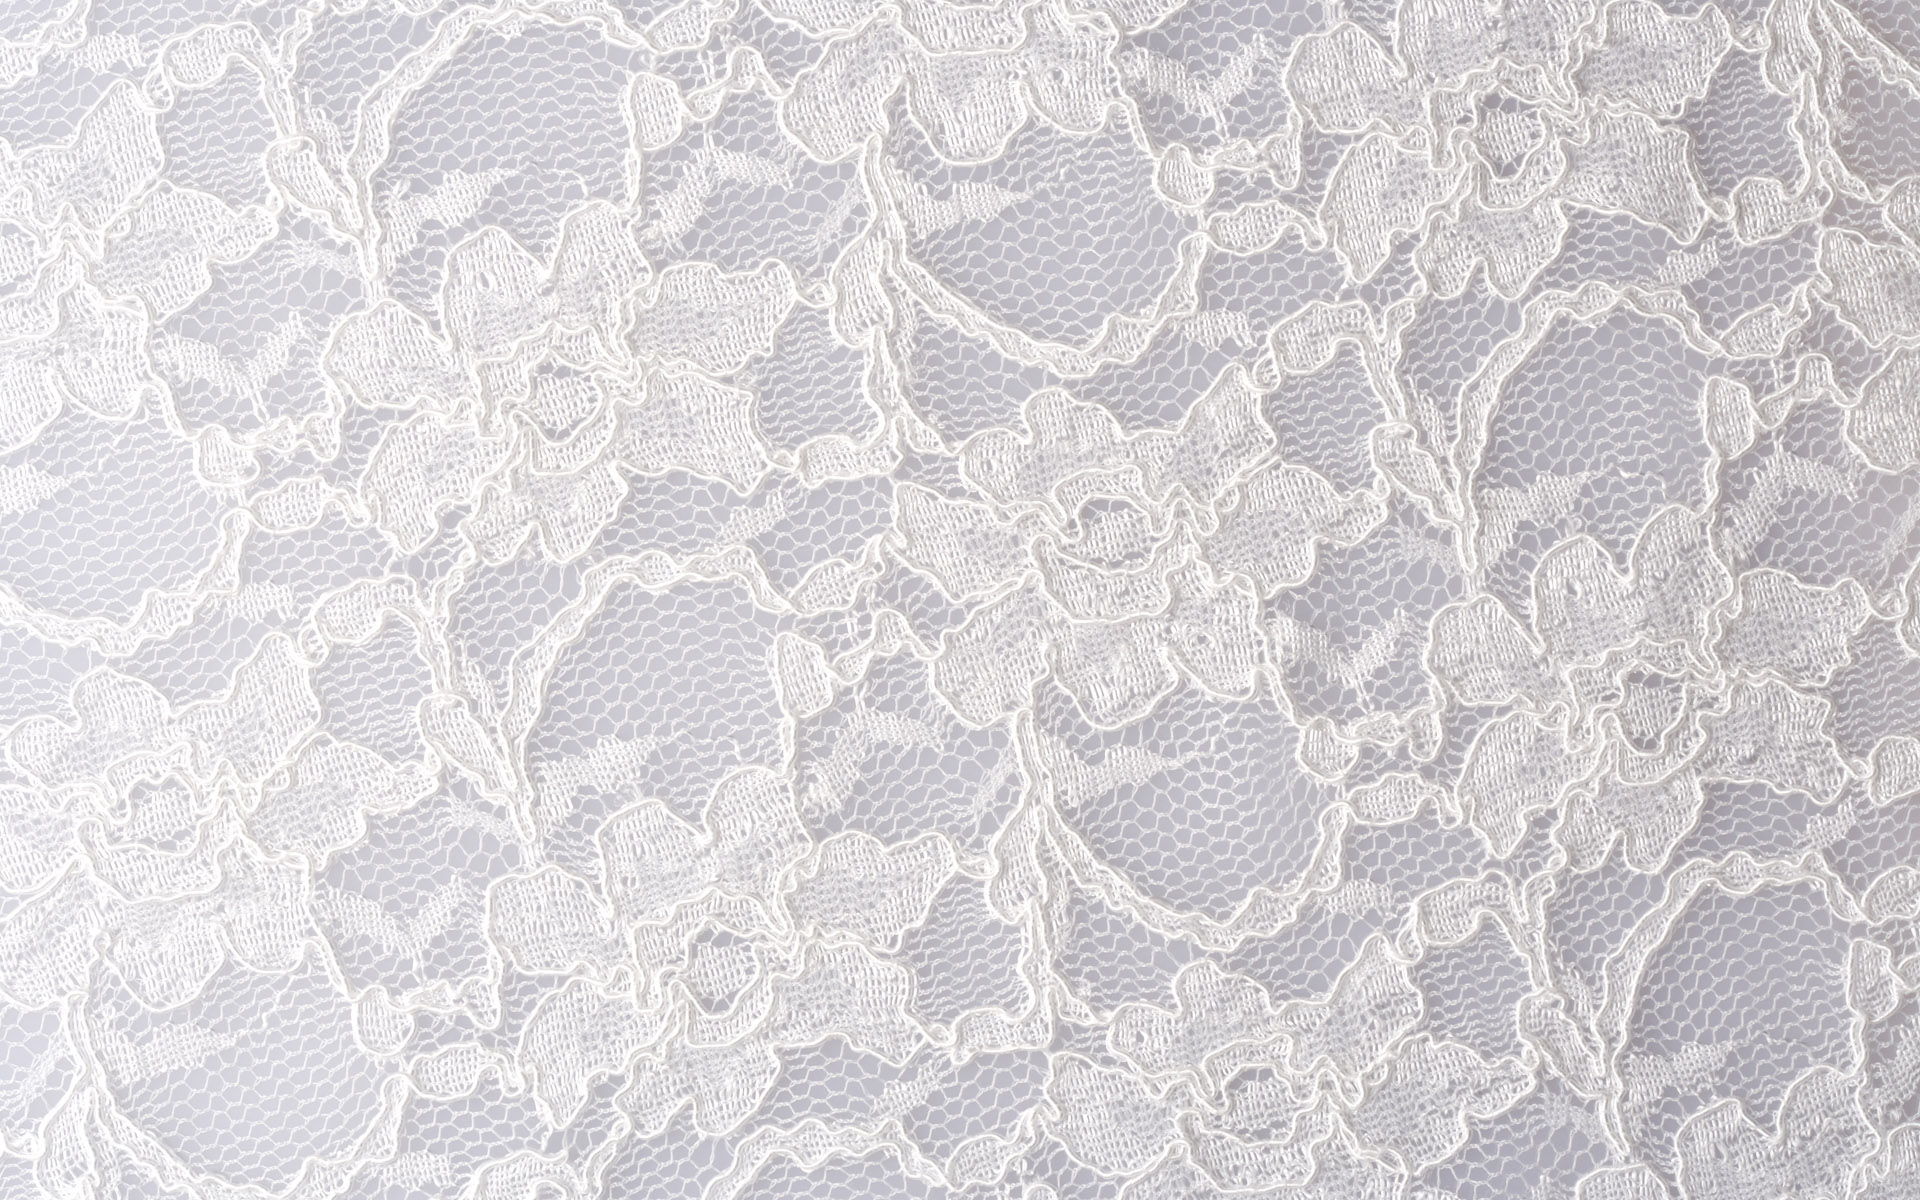 Lace Tumblr Background